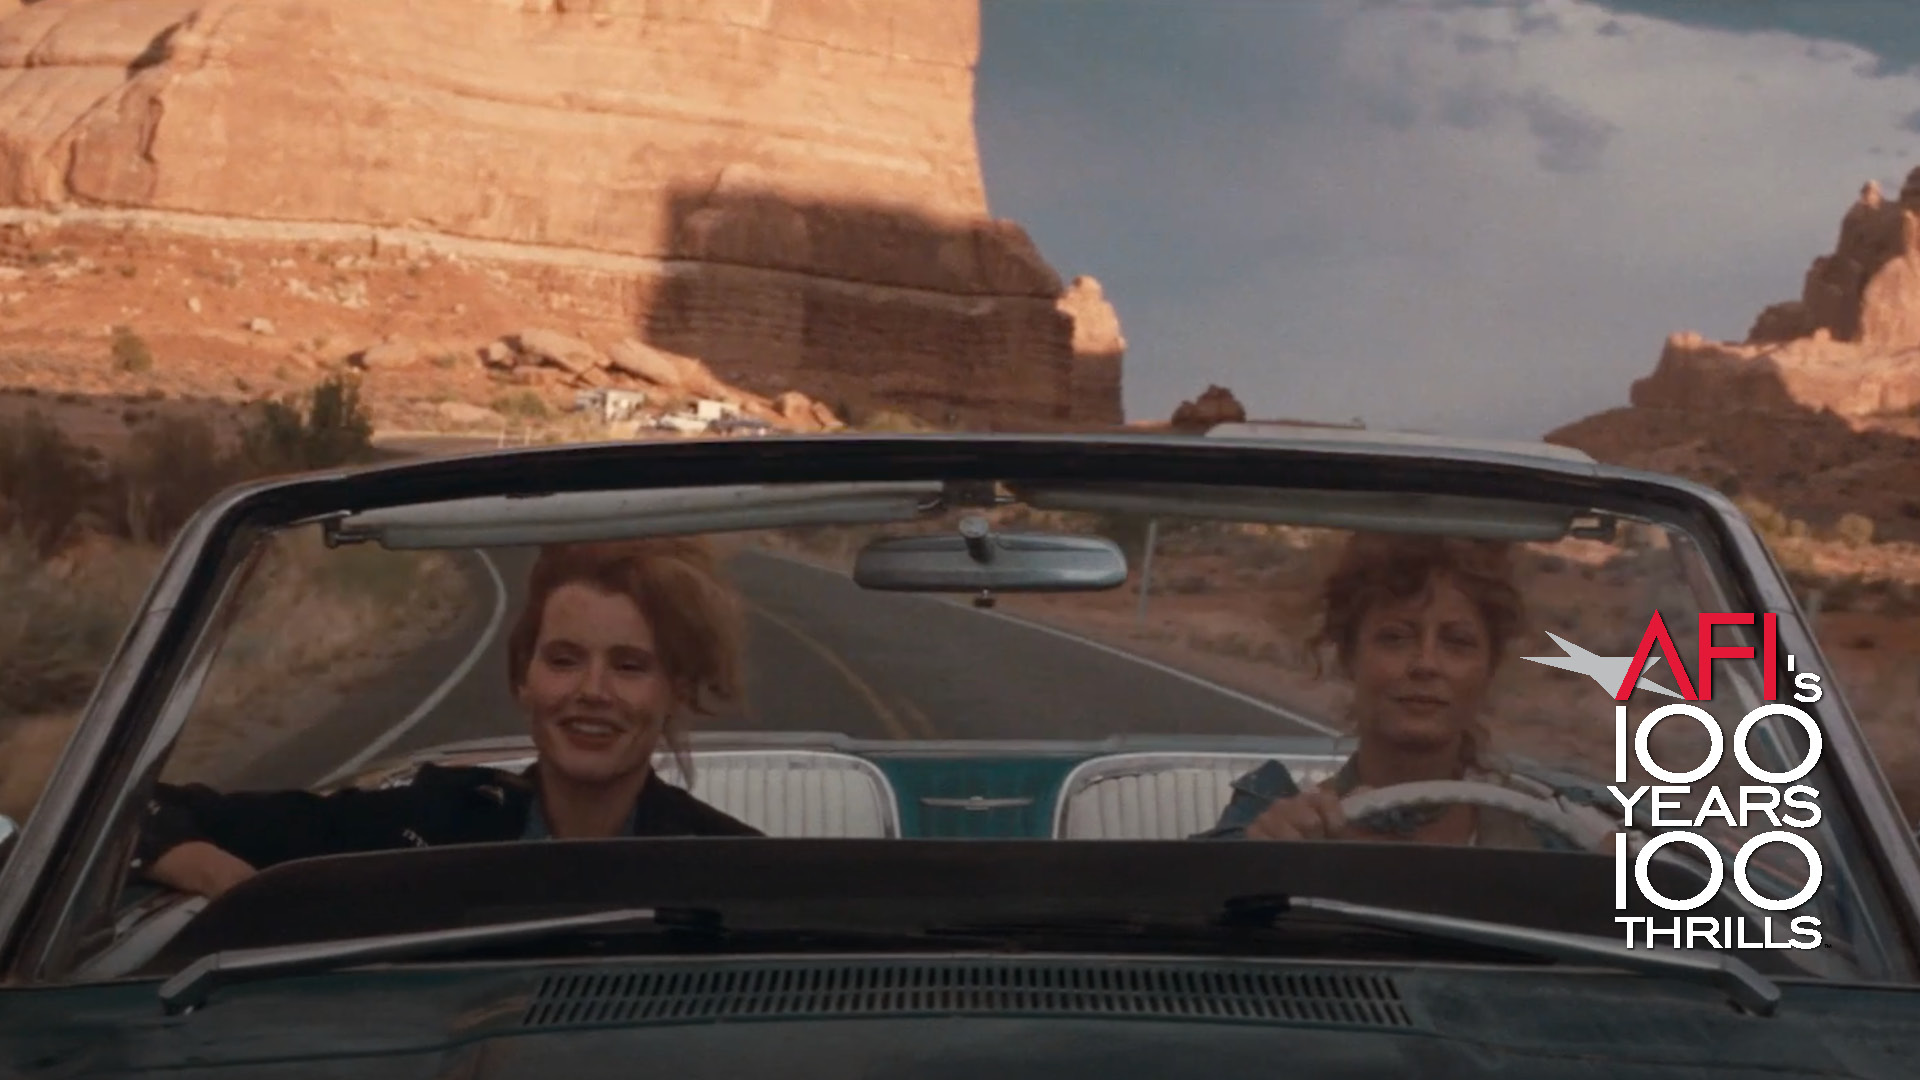 There is and AFI 100 Years...100 Movies logo in the lower righthand corner. The film still is from THELMA & LOUISE and shows the two main characters driving in their iconic convertible with red rock landscapes in the background.